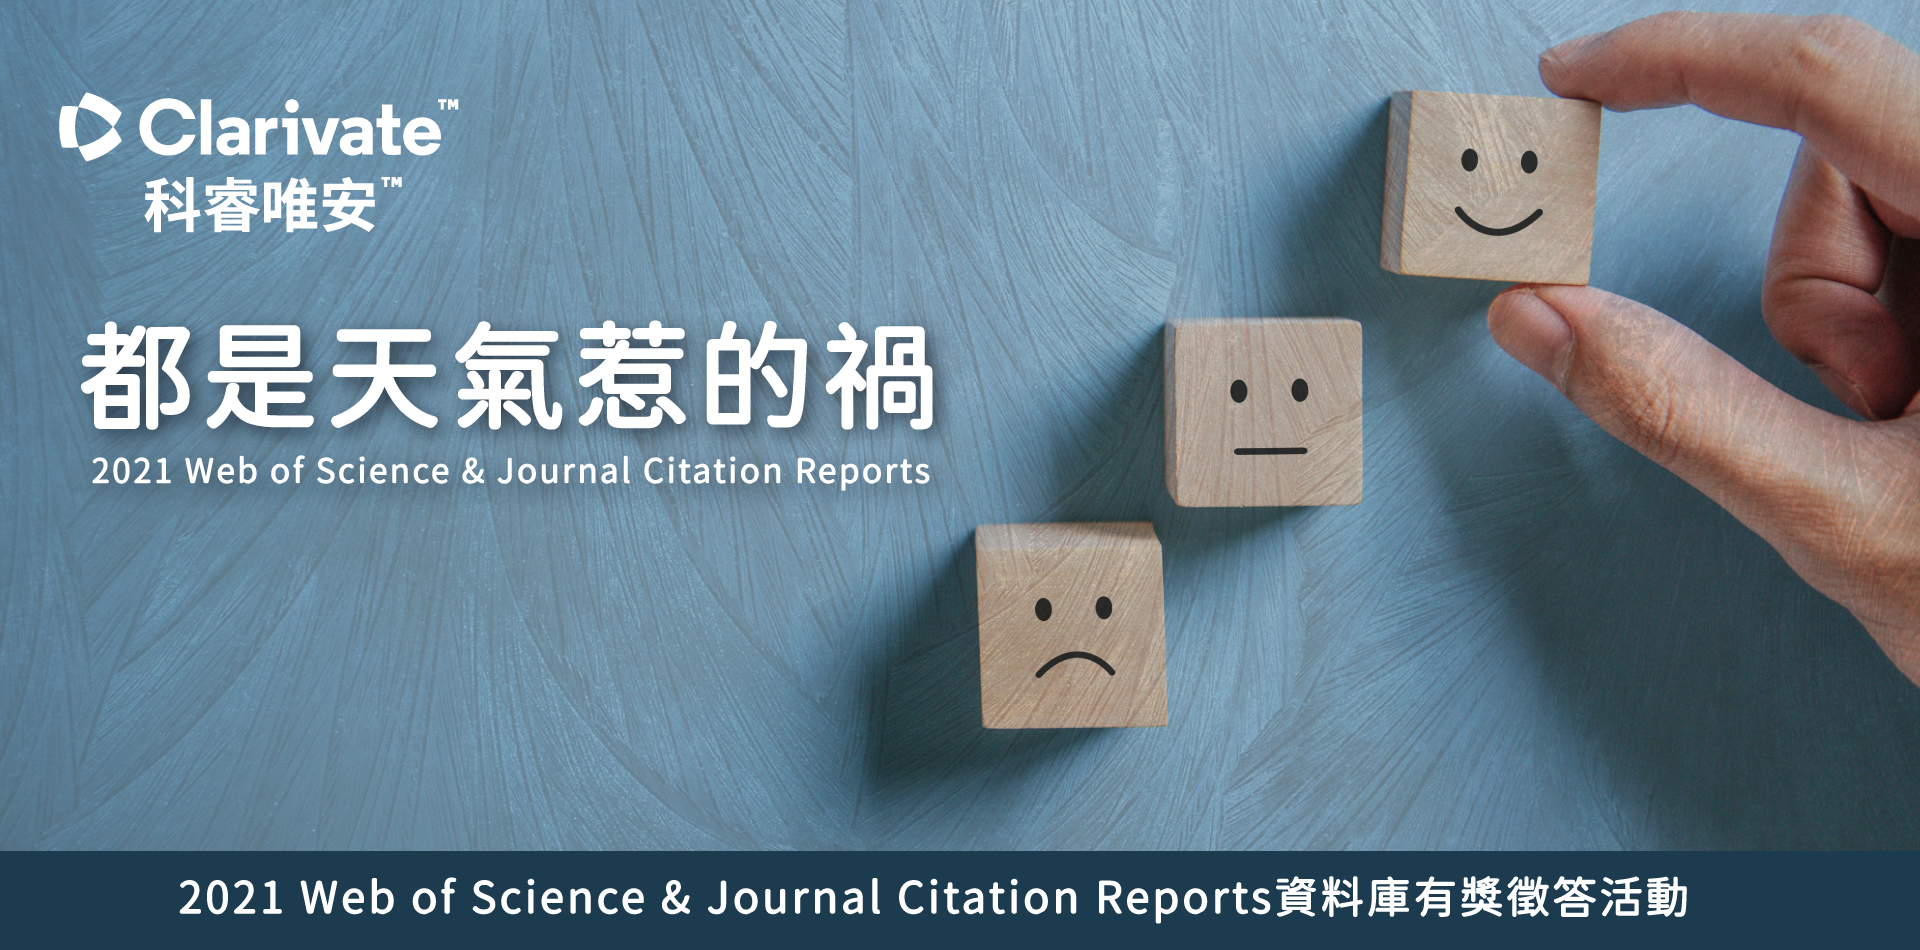 2021 Web of Science & Journal Citation Reports Q & A Contest － Trouble from Weather